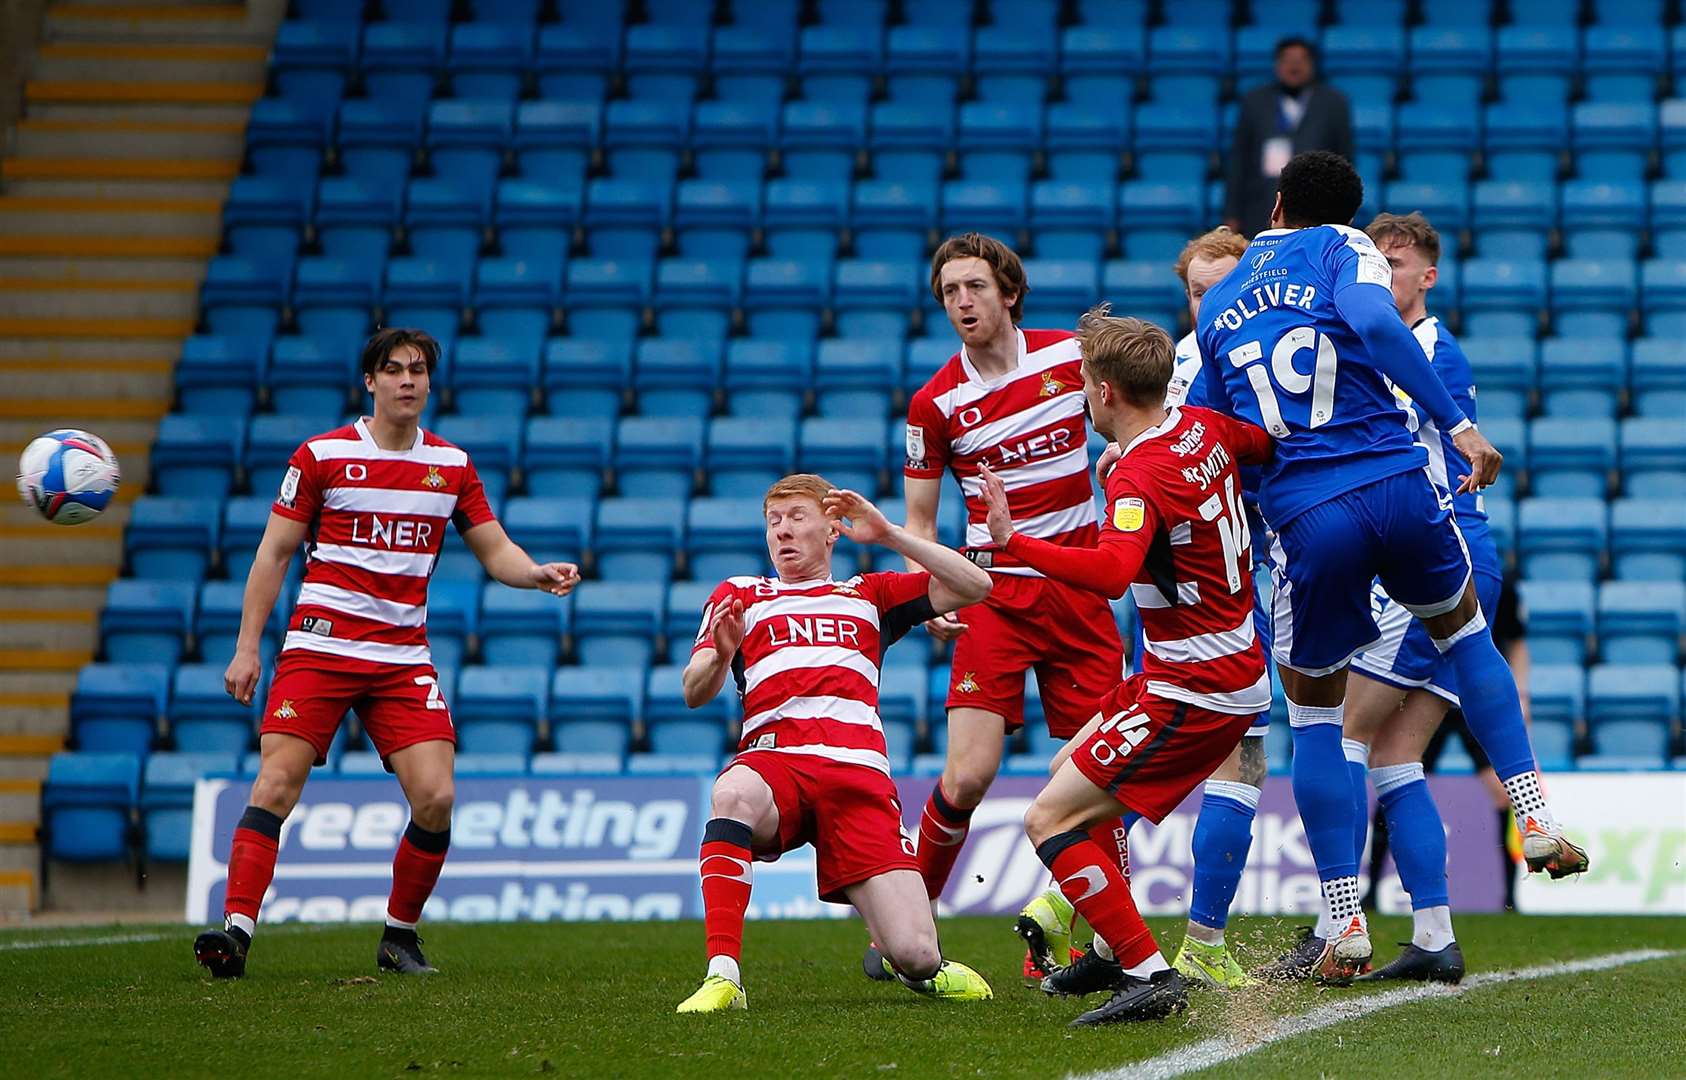 Vadaine Oliver puts Gills 2-0 ahead against Doncaster on Saturday. Picture: Andy Jones (45335496)